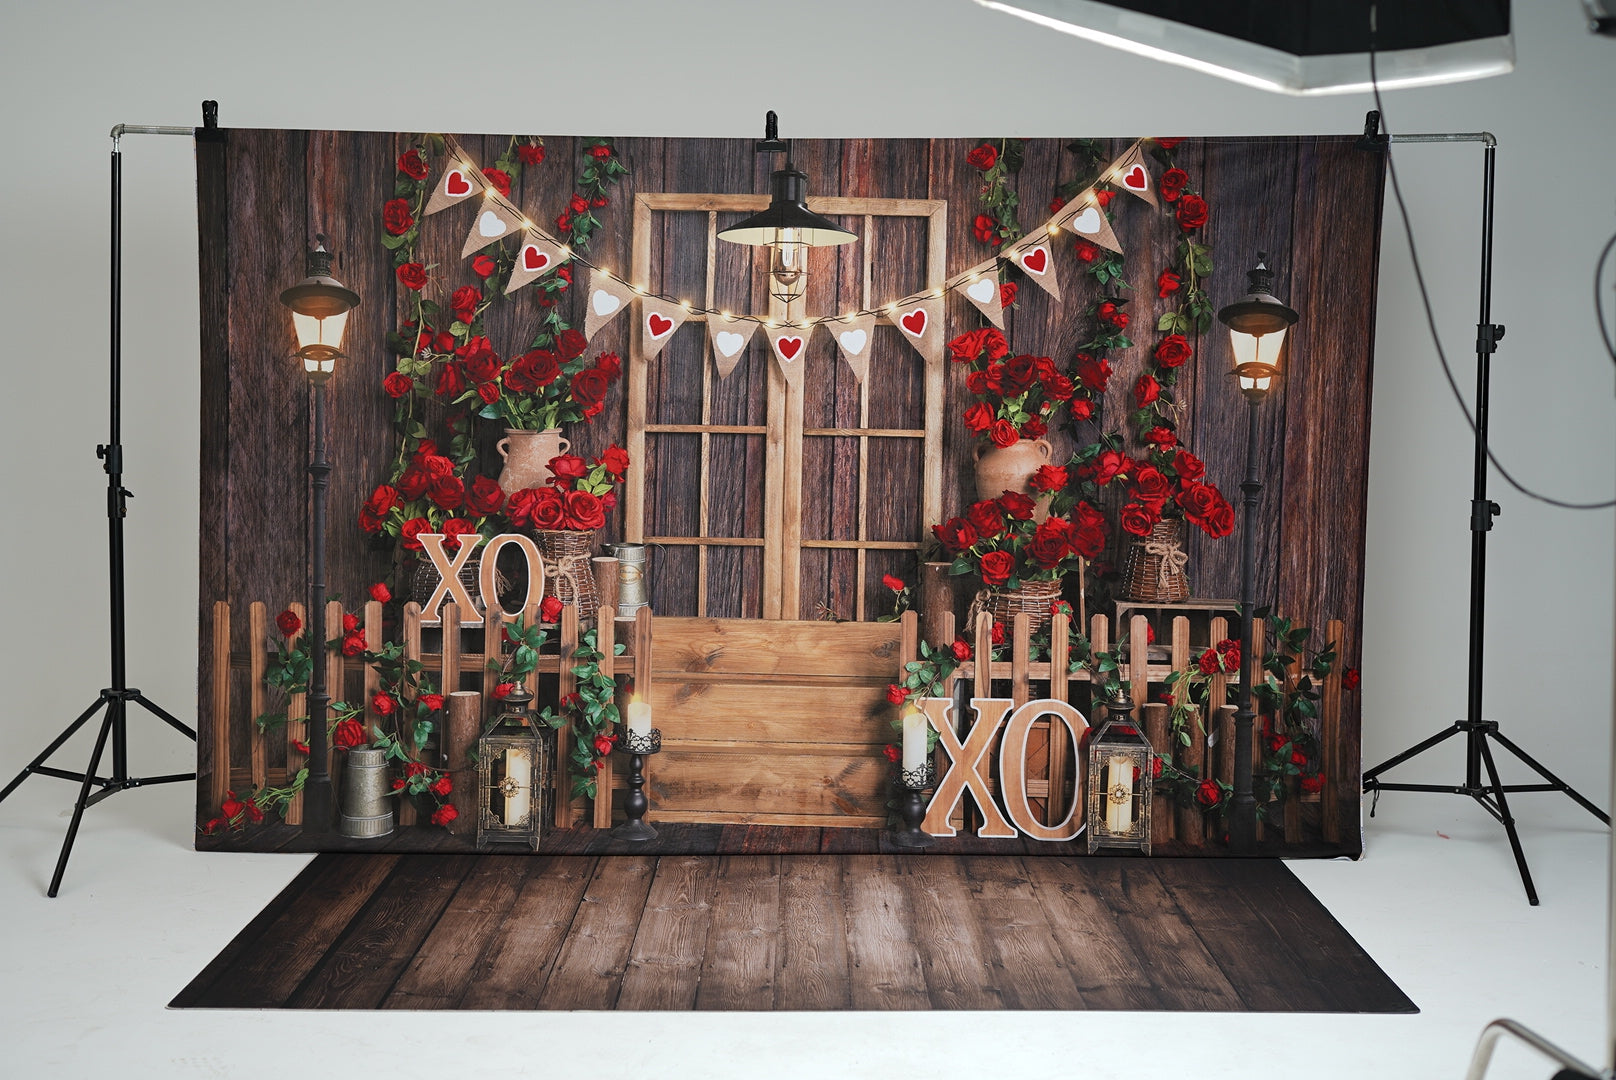 Kate Valentine's day Backdrop Rose Manor Board Designed by Emetselch